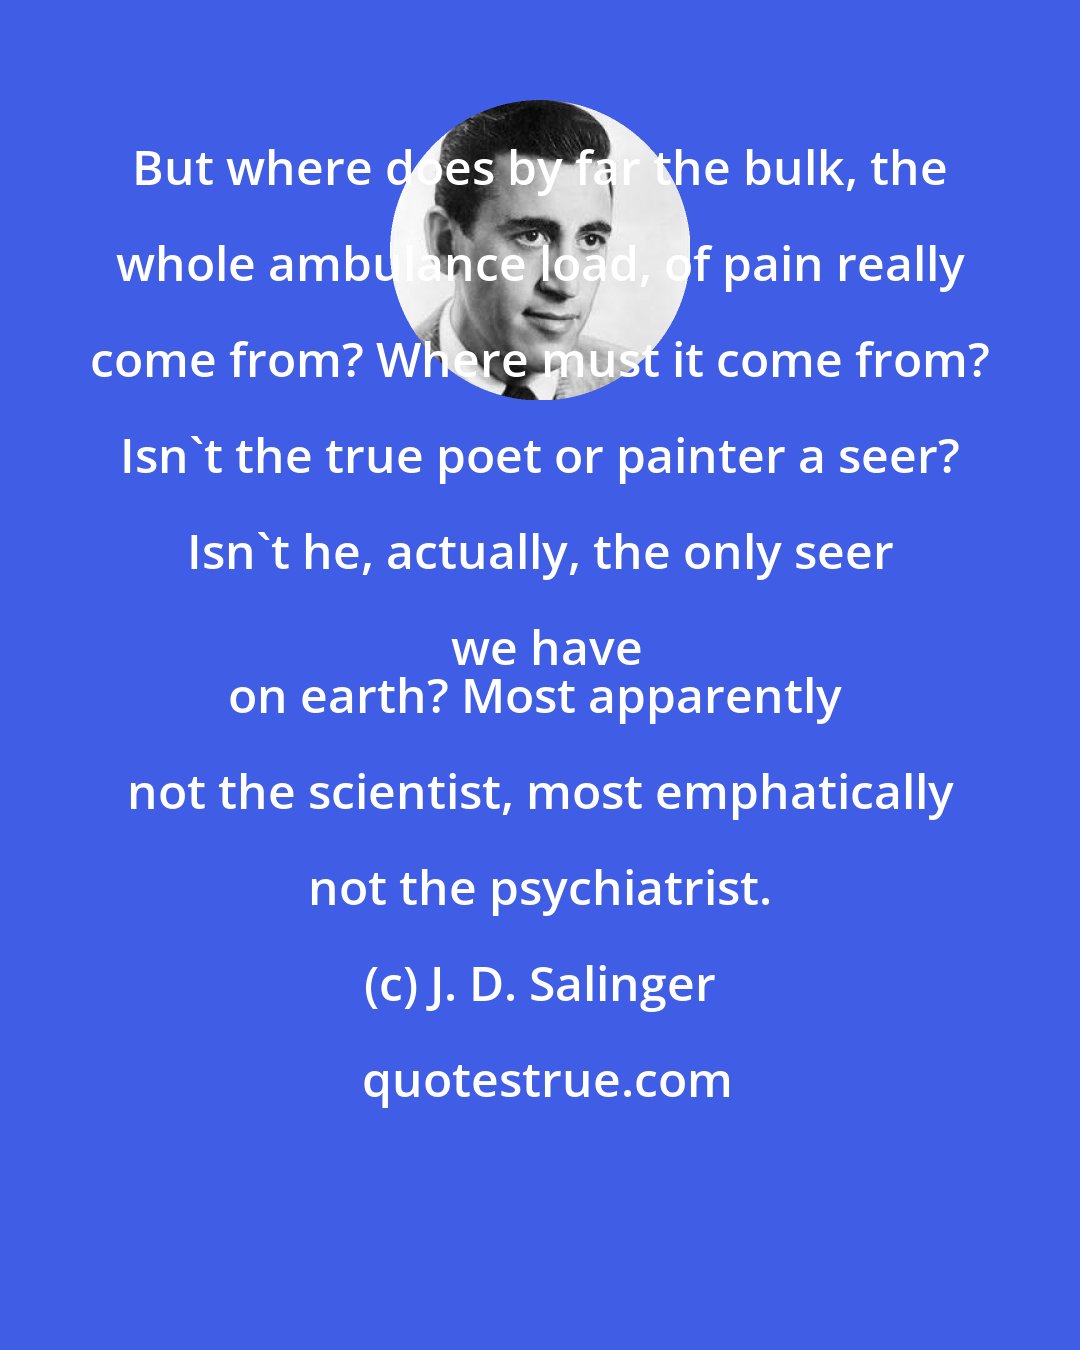 J. D. Salinger: But where does by far the bulk, the whole ambulance load, of pain really come from? Where must it come from? Isn't the true poet or painter a seer? Isn't he, actually, the only seer we have
on earth? Most apparently not the scientist, most emphatically not the psychiatrist.